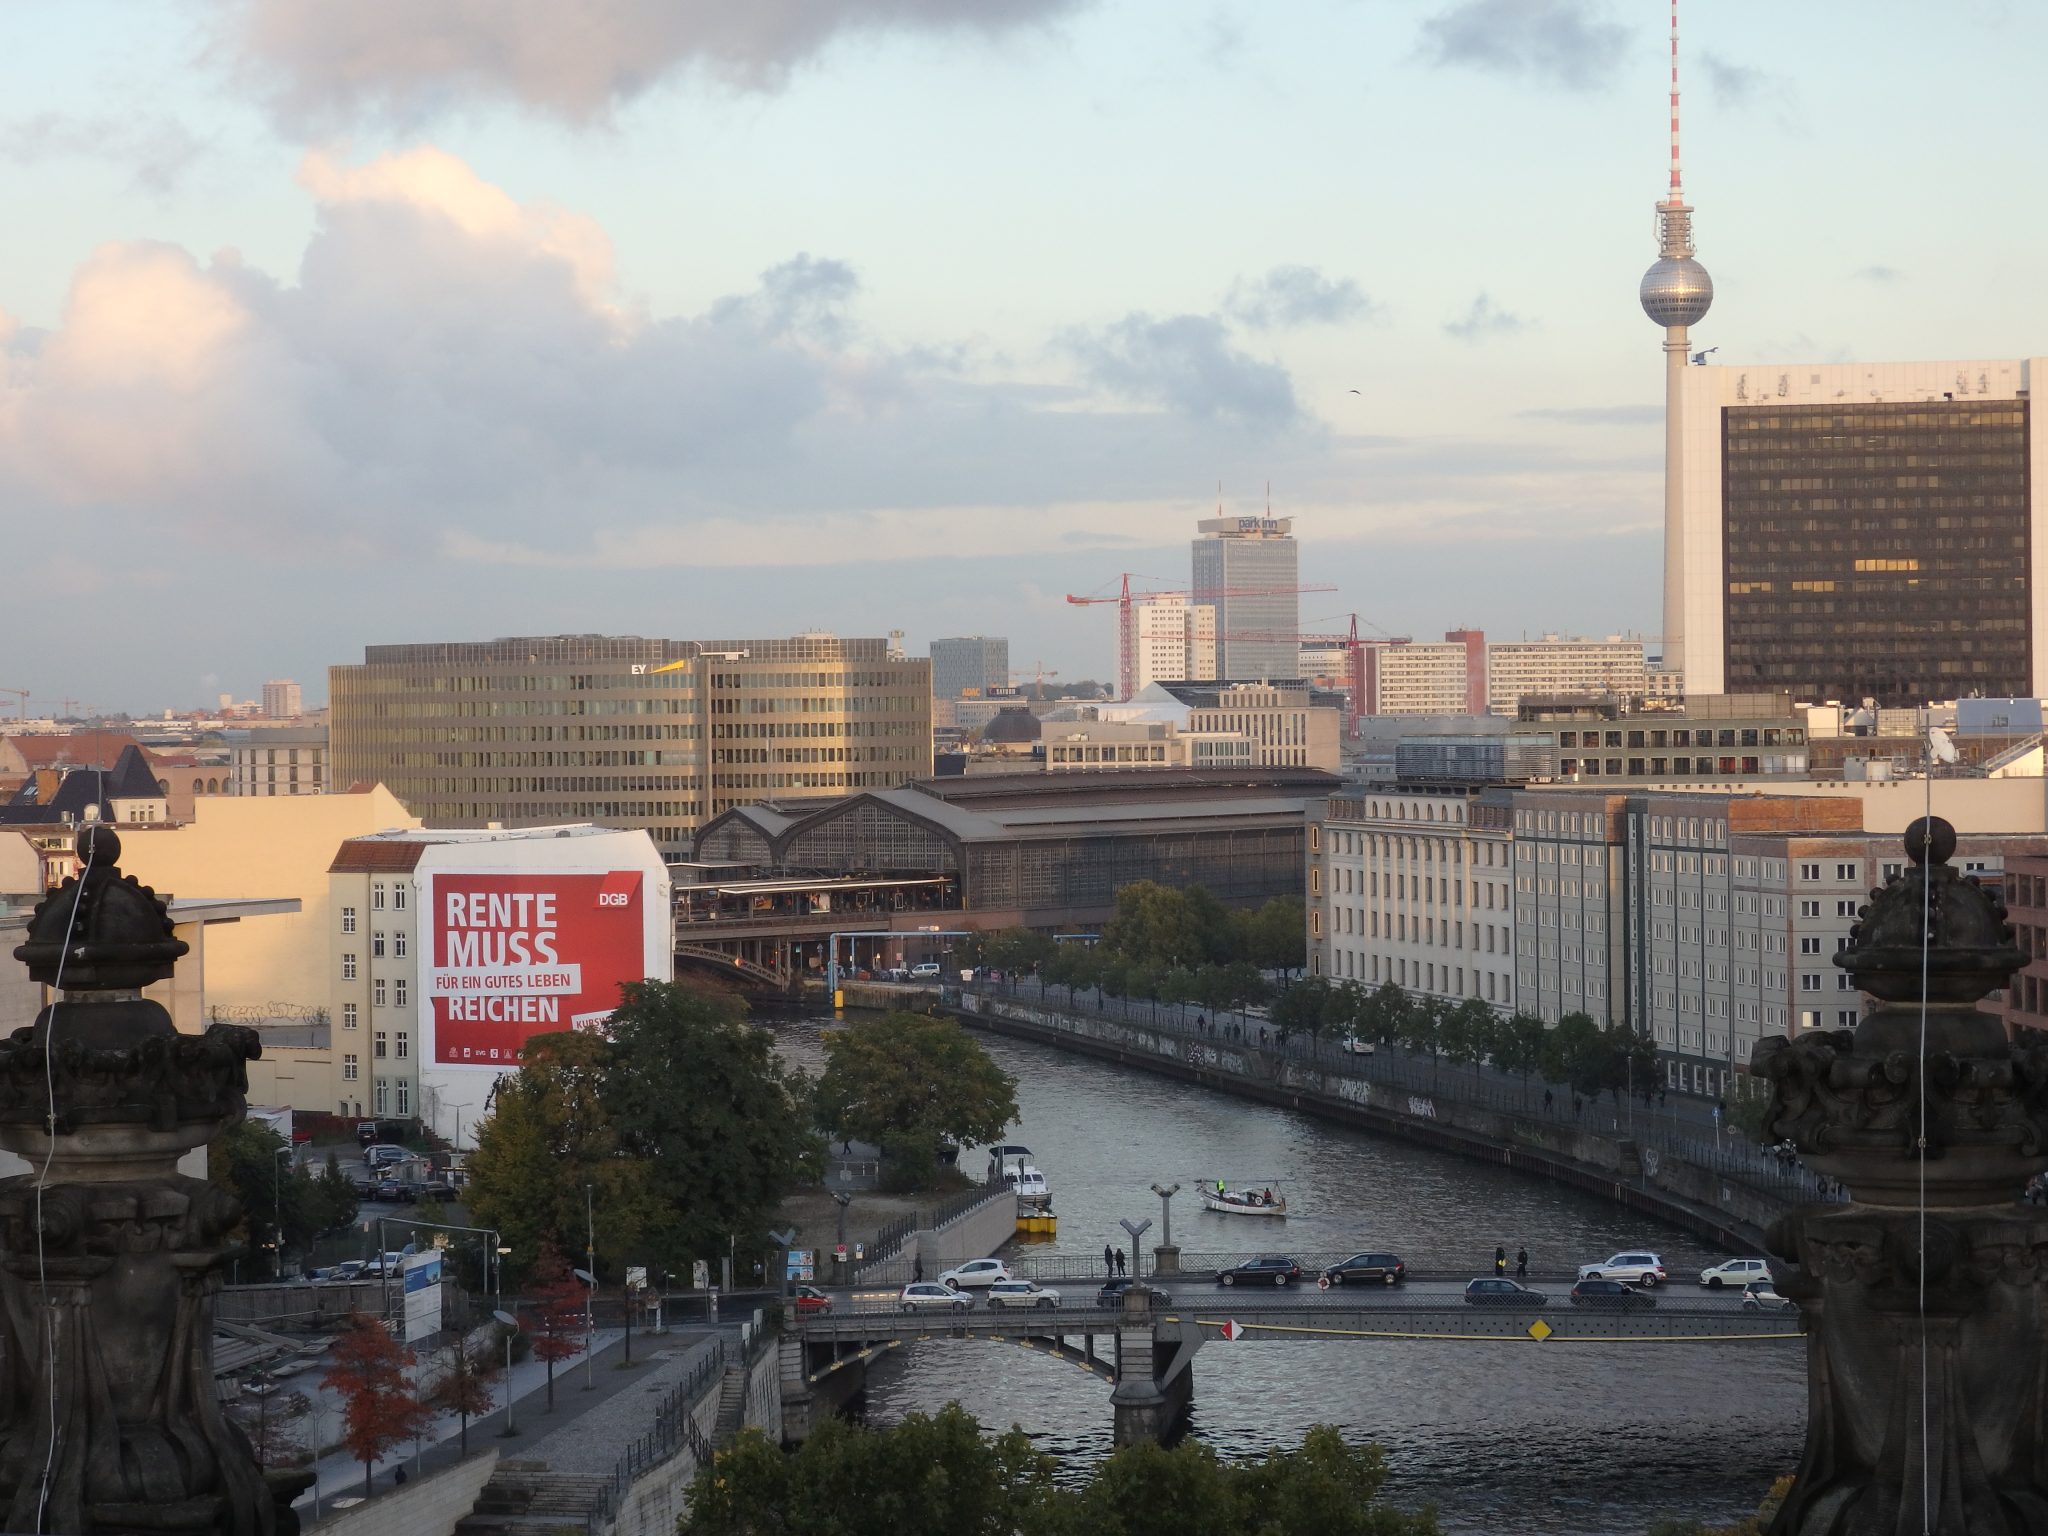 One of many views from the Reichstag dome. Here, on the Spree River, you can see Friedrichstrasse Station, the low brown building; the Television Tower; and, in front of the tower, the International Trade Center.